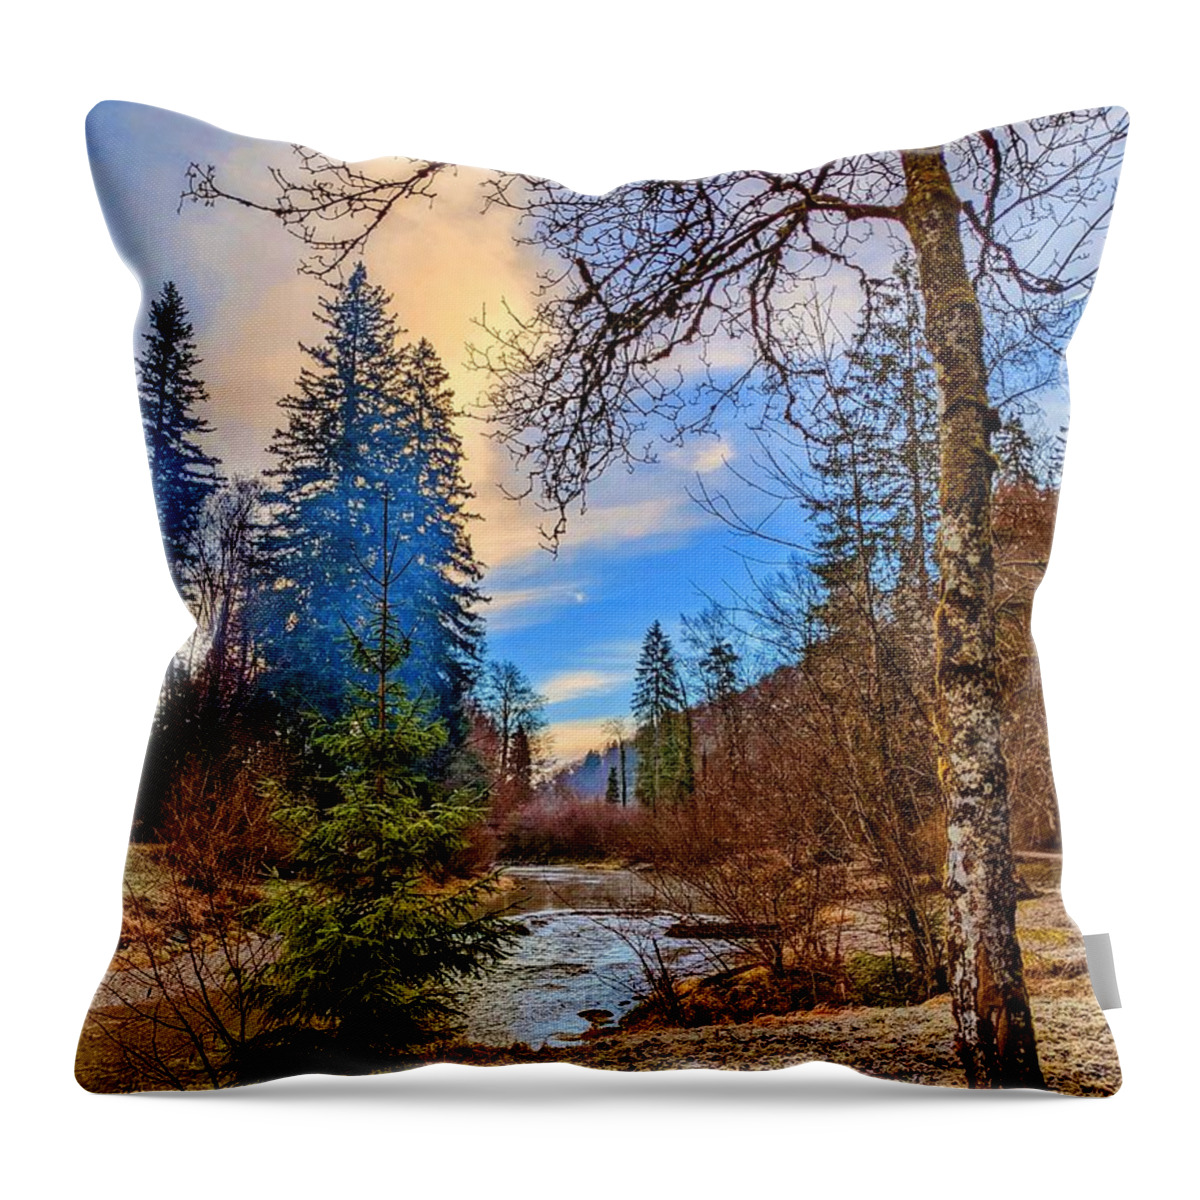 Frosty Throw Pillow featuring the photograph Frosty Winter Morning by Claudia Zahnd-Prezioso